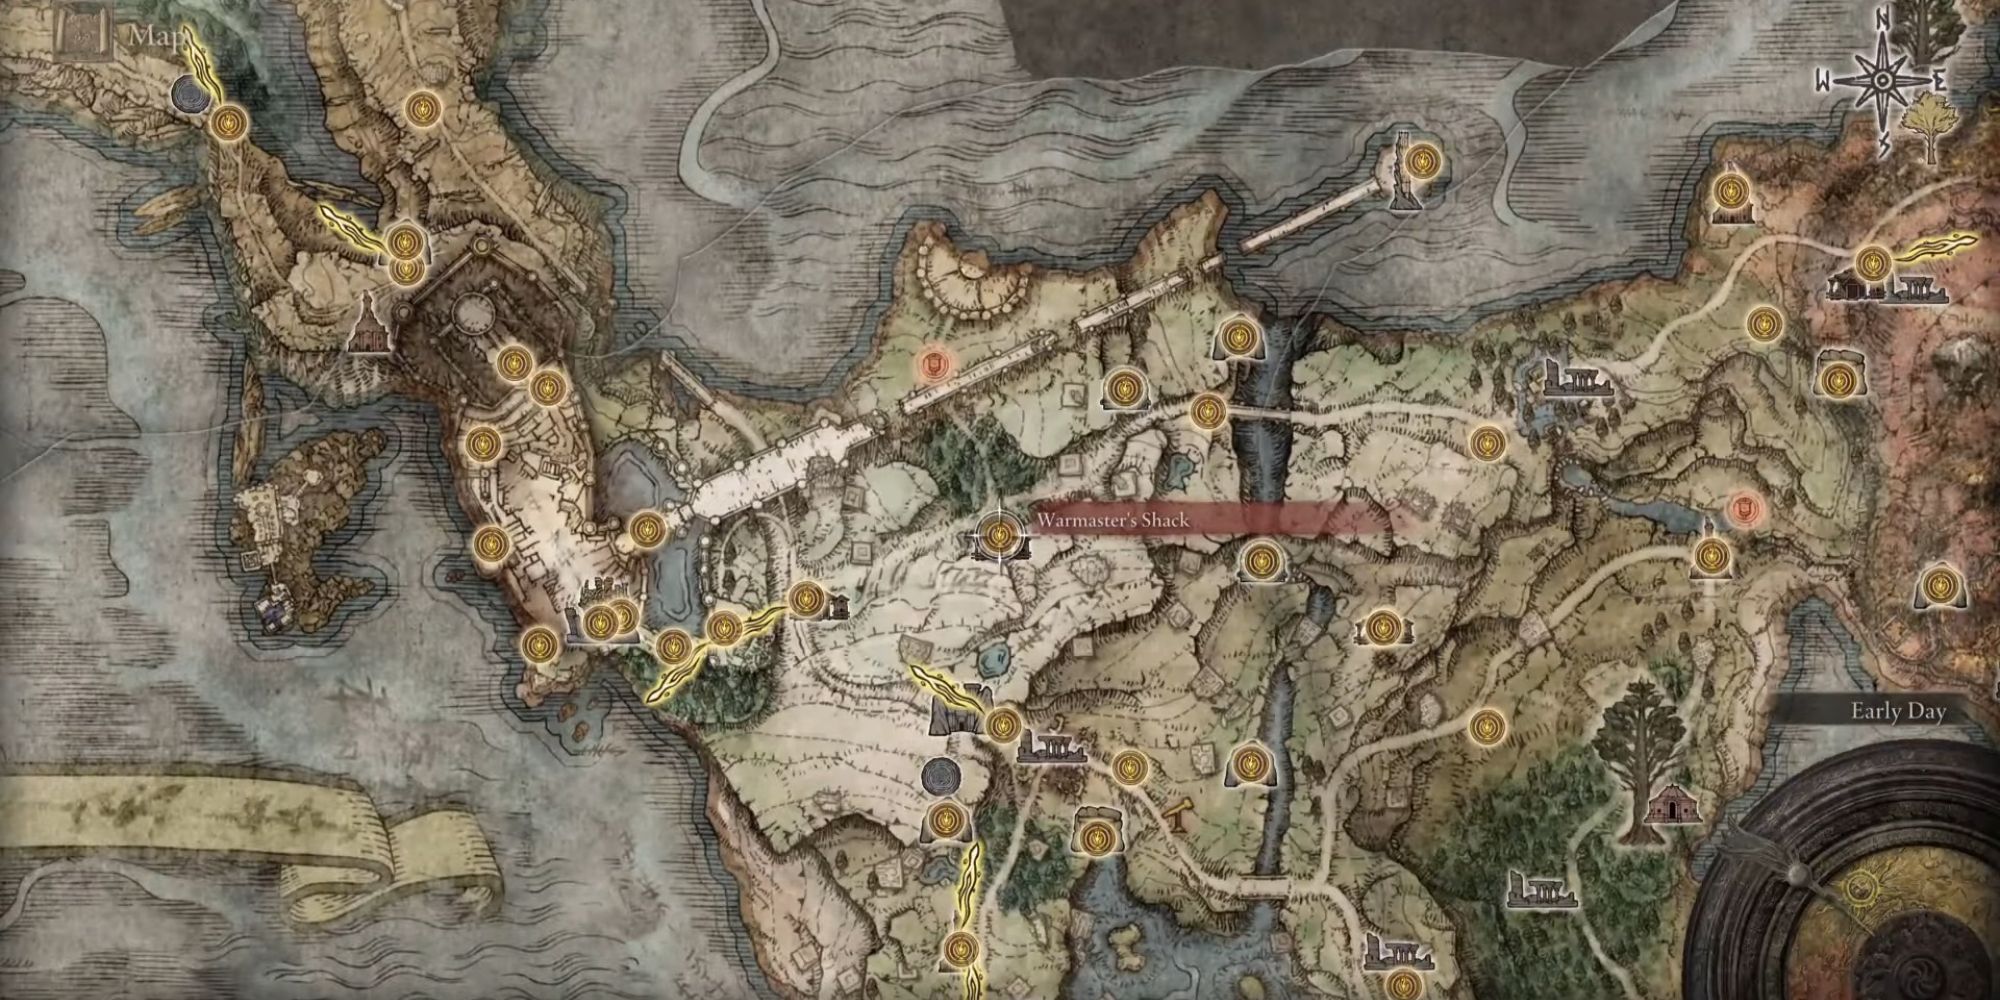 Warmasters shack on the elden ring map